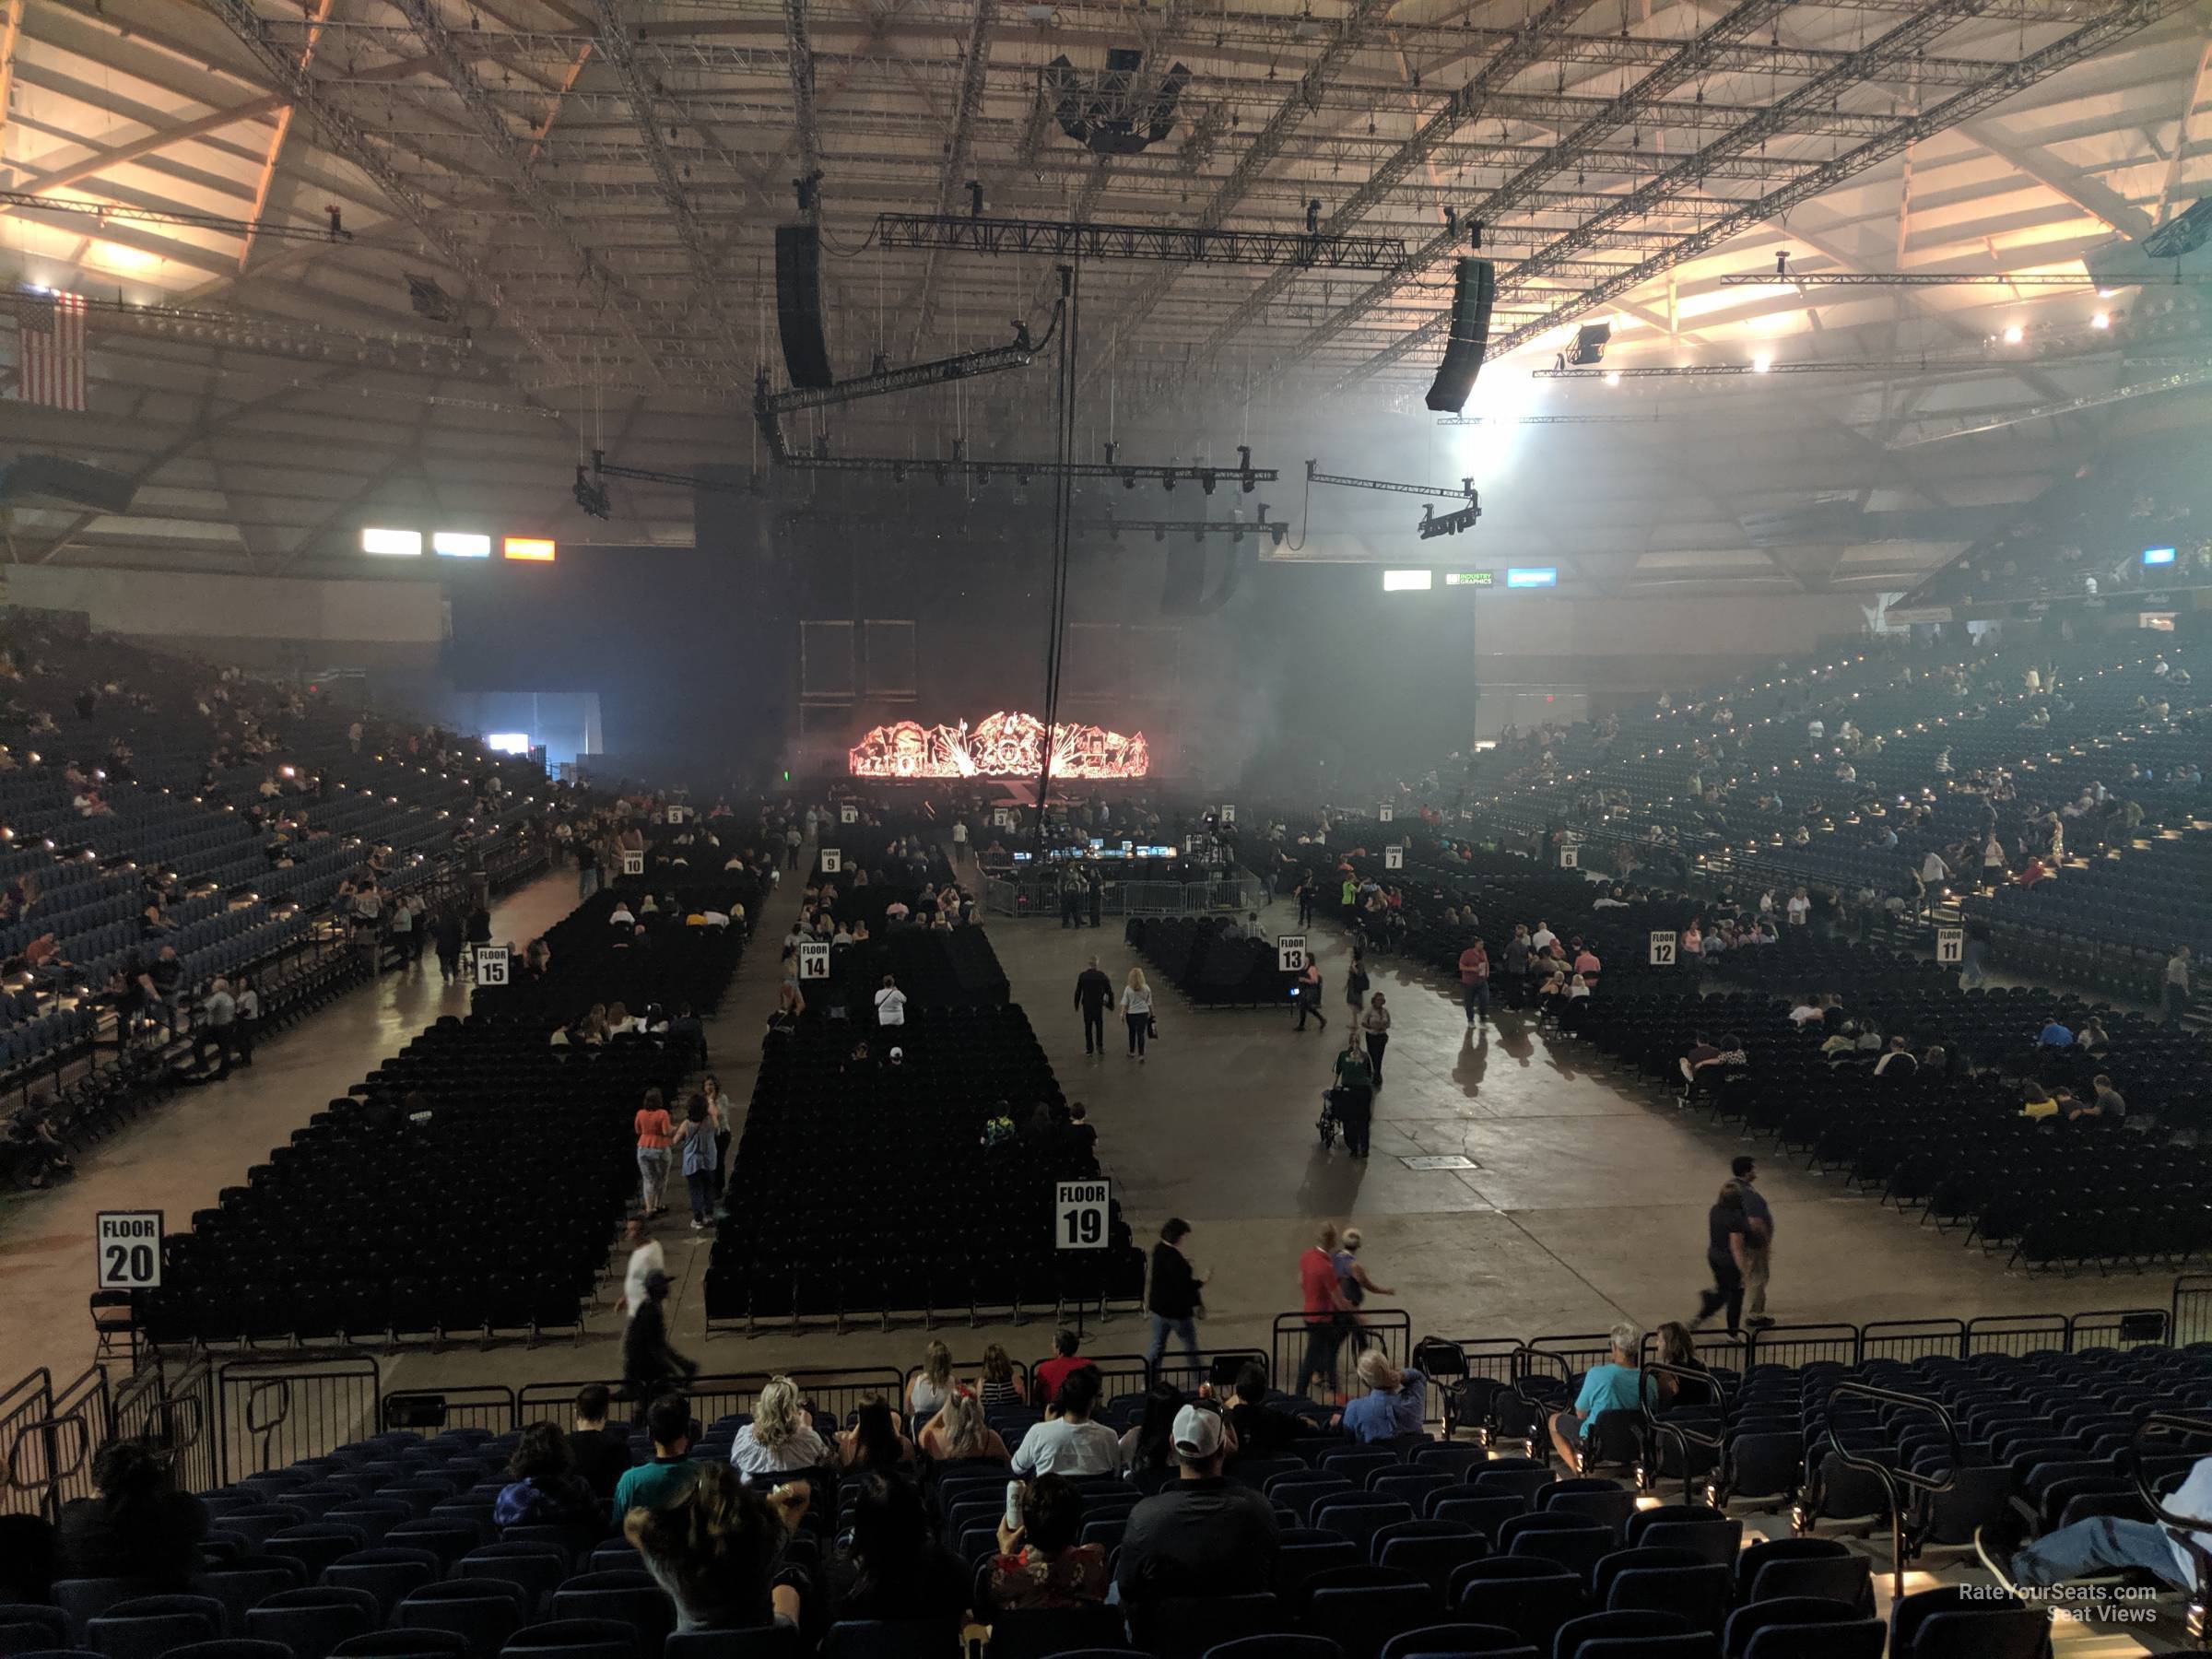 head-on concert view at Tacoma Dome